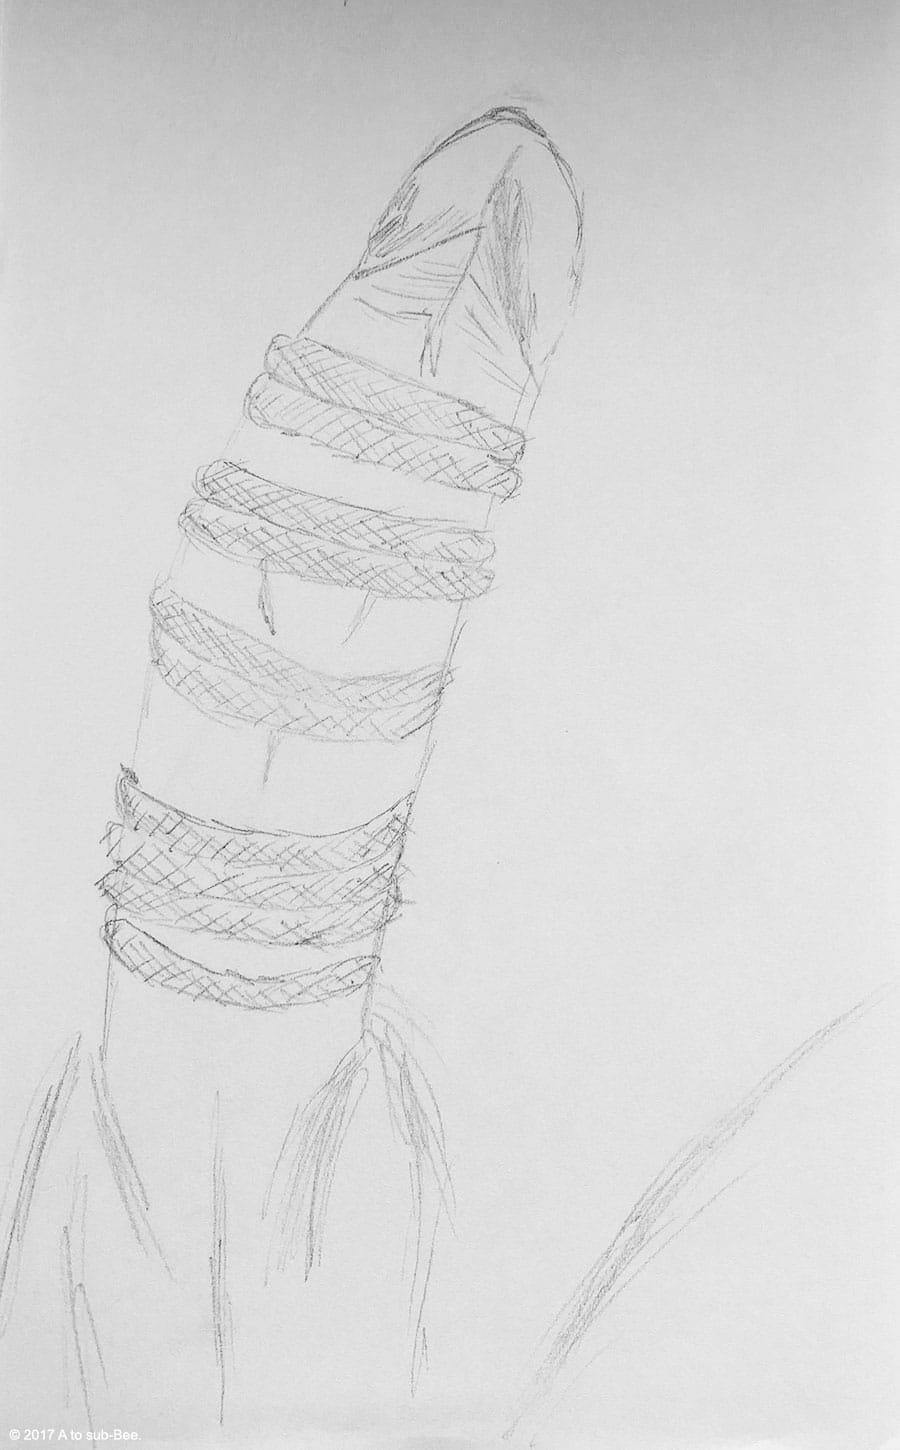 Bee's first attempt of being a it Sketchy. A drawing of the Keepers cock tied up in paracord.